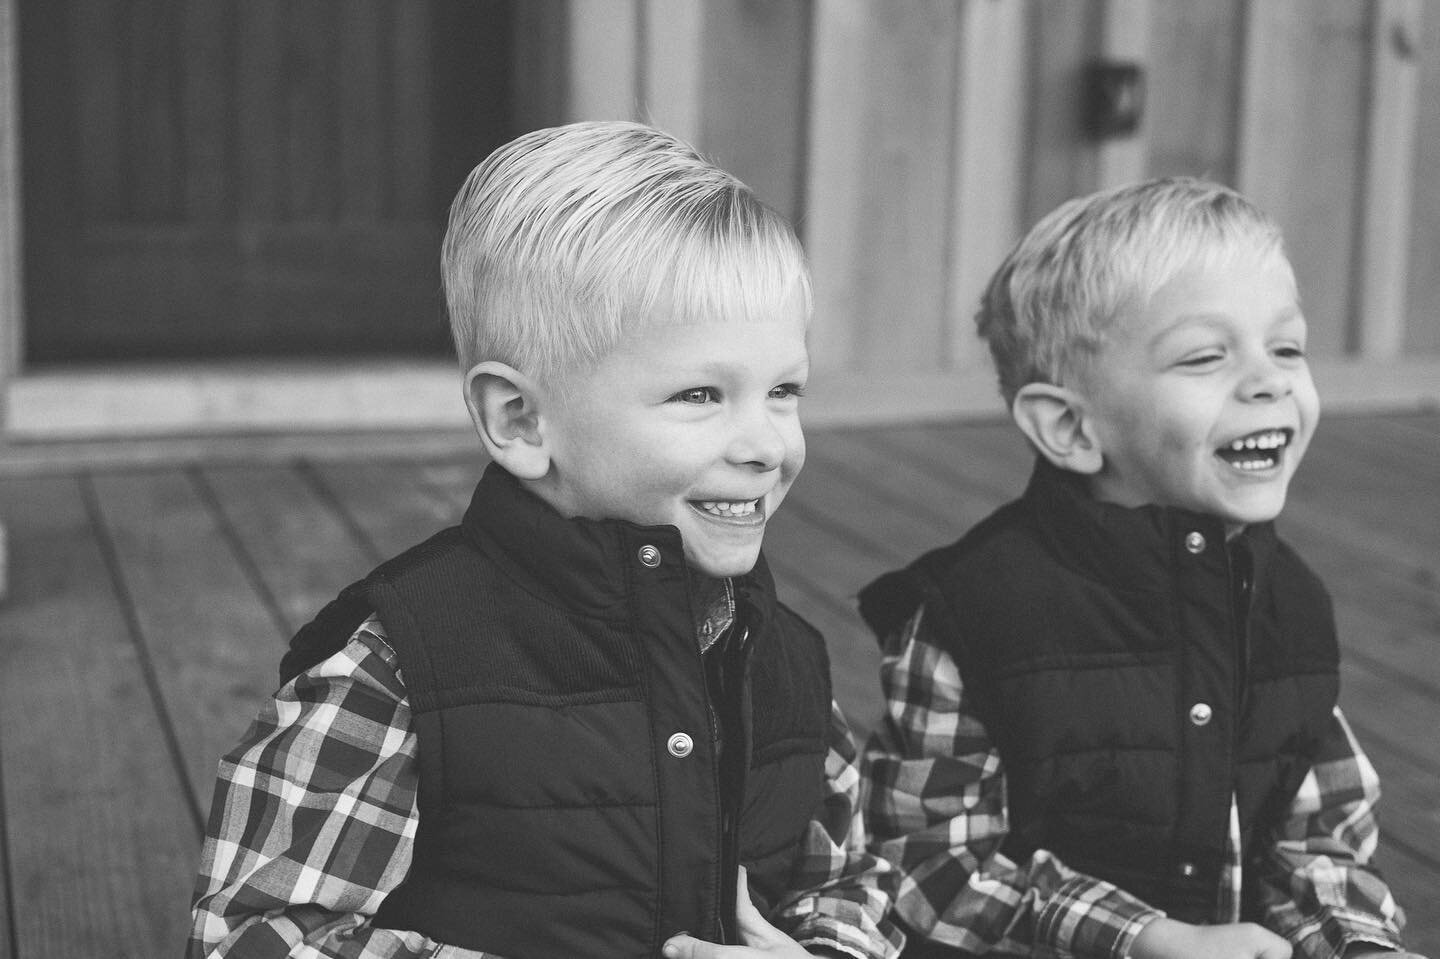 Brothers :: From the archives - twin brothers, taken way back in 2015, with a new edit. I feel like you can hear the laughter in this photo, I wish I could remember what was so funny, it must have been someone pulling a funny face to get a reaction ?